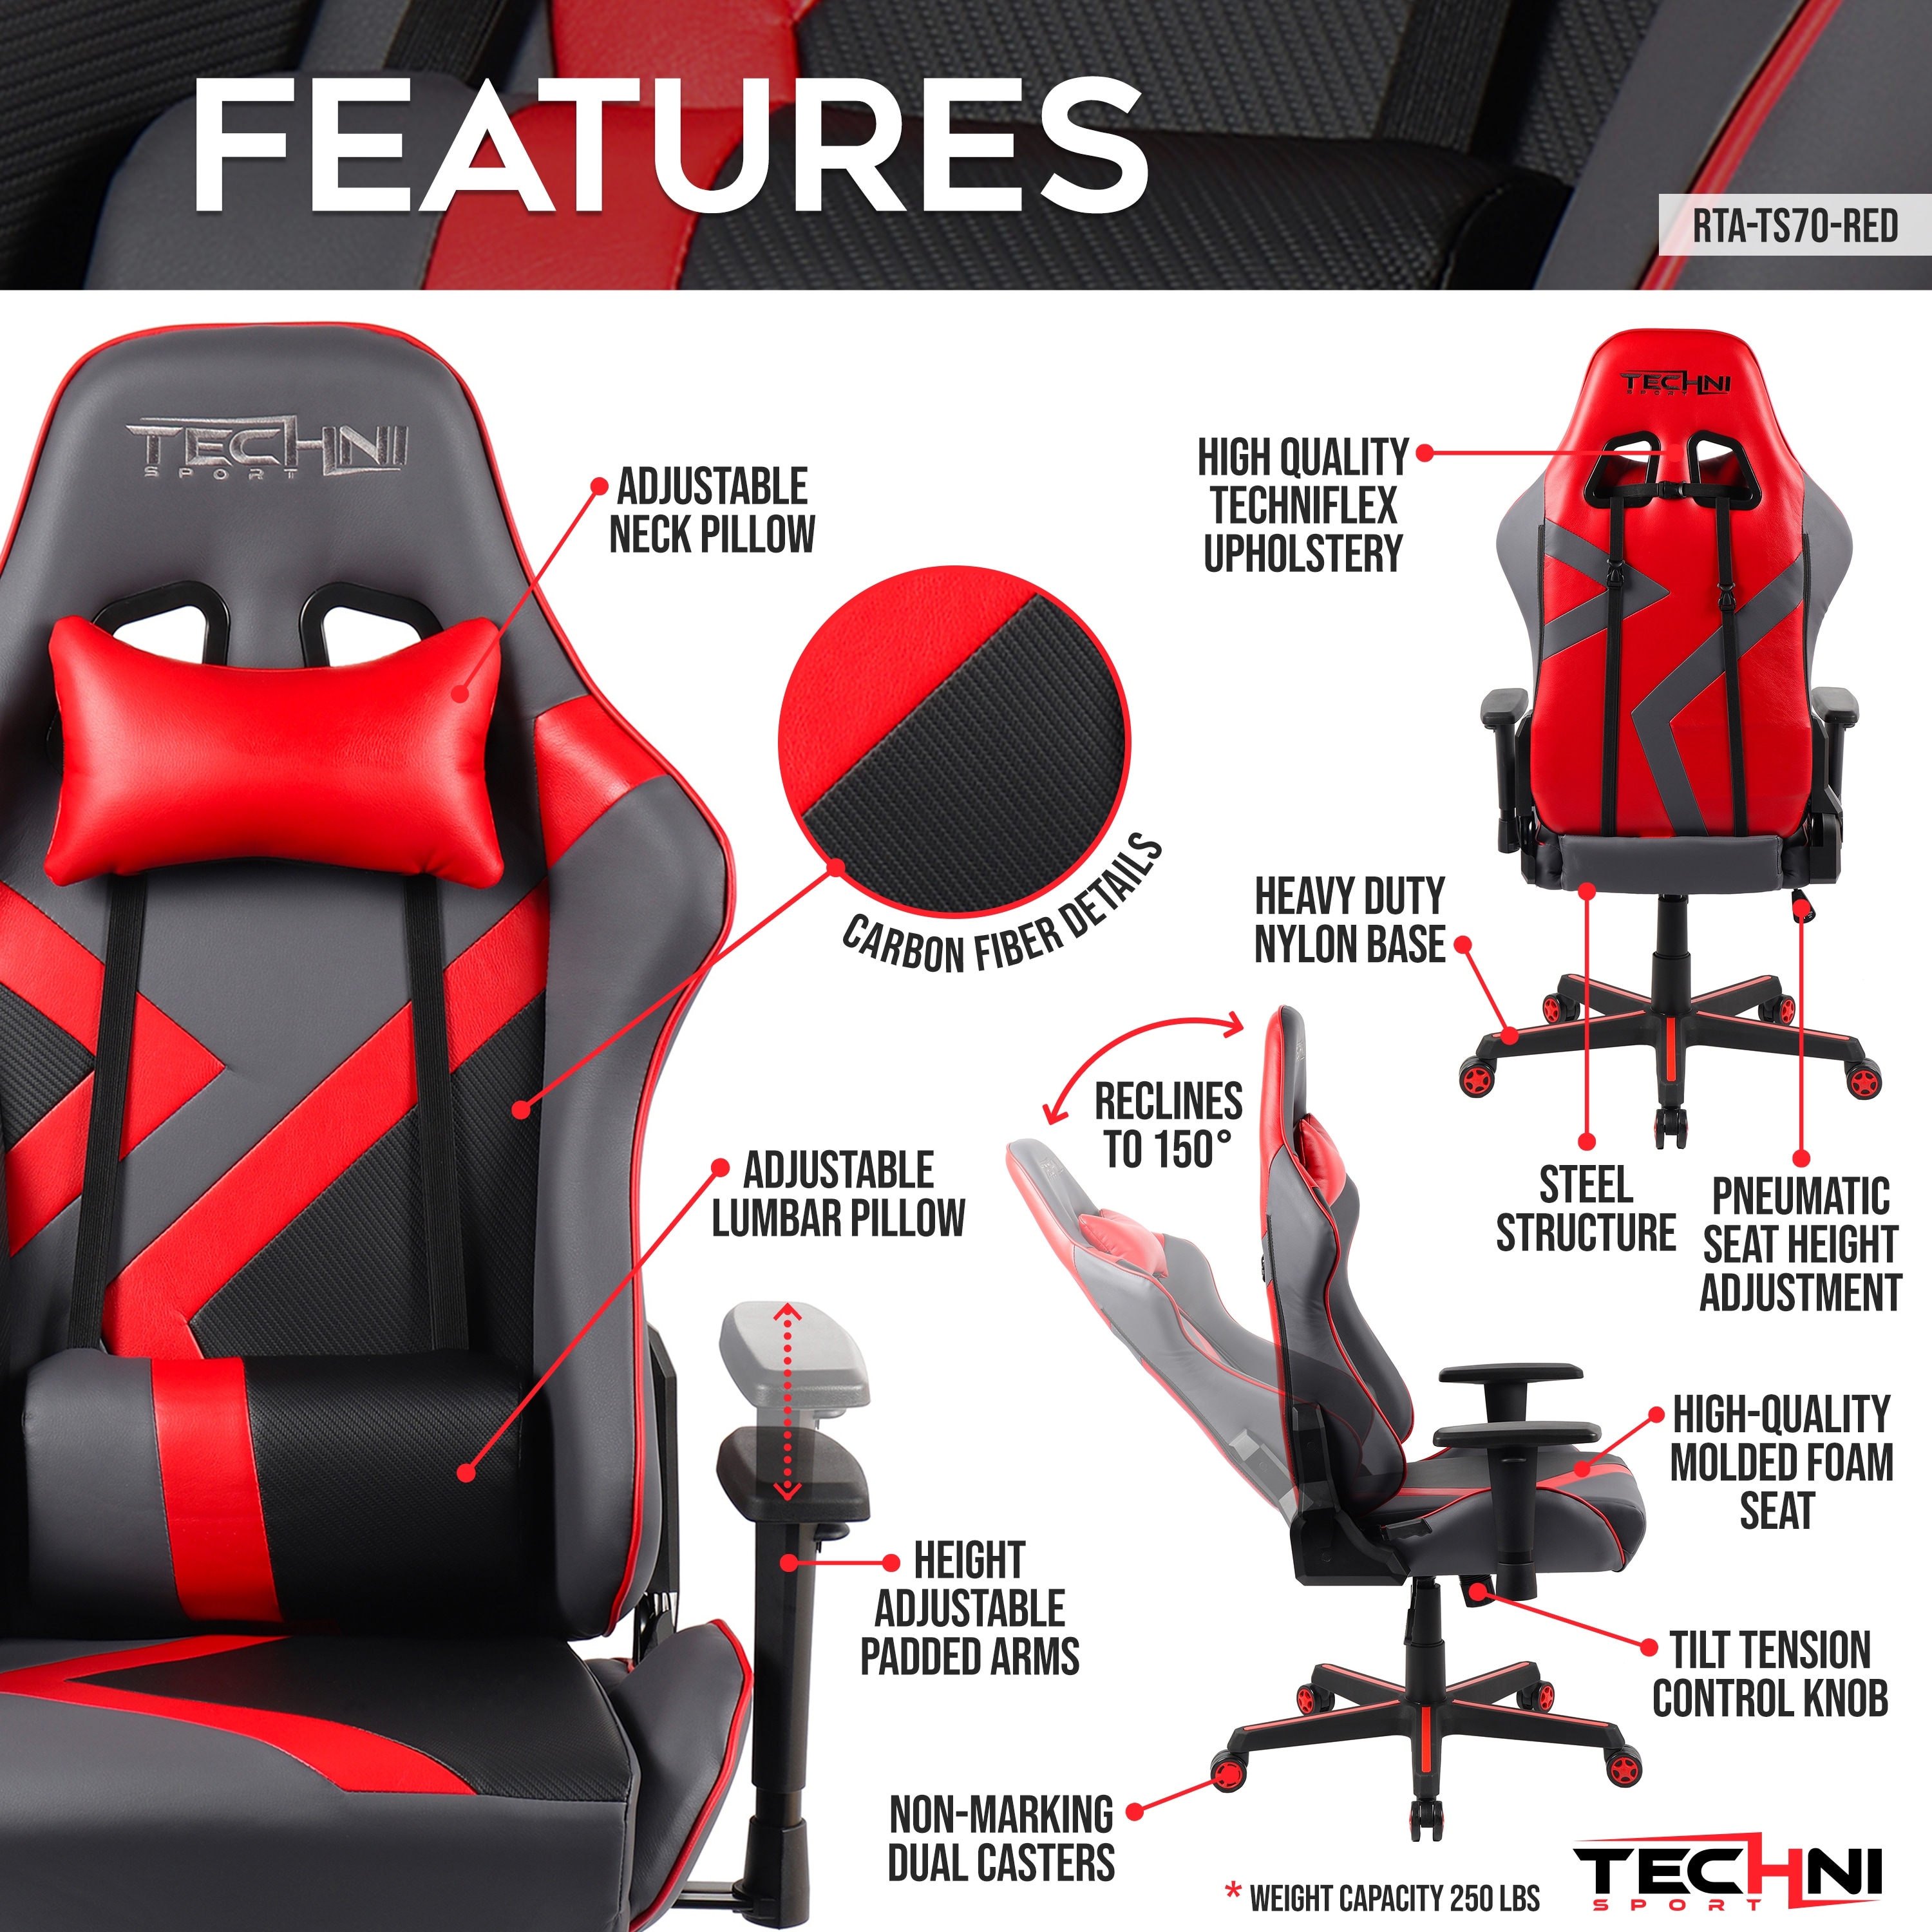 https://ak1.ostkcdn.com/images/products/is/images/direct/6a1e6c1f5e4e92868edecd33ae7225230f98d9a1/Office-Gaming-Chair-Ergonomic-Adjustable-Chair-Head-and-Lumbar-Pillows.jpg